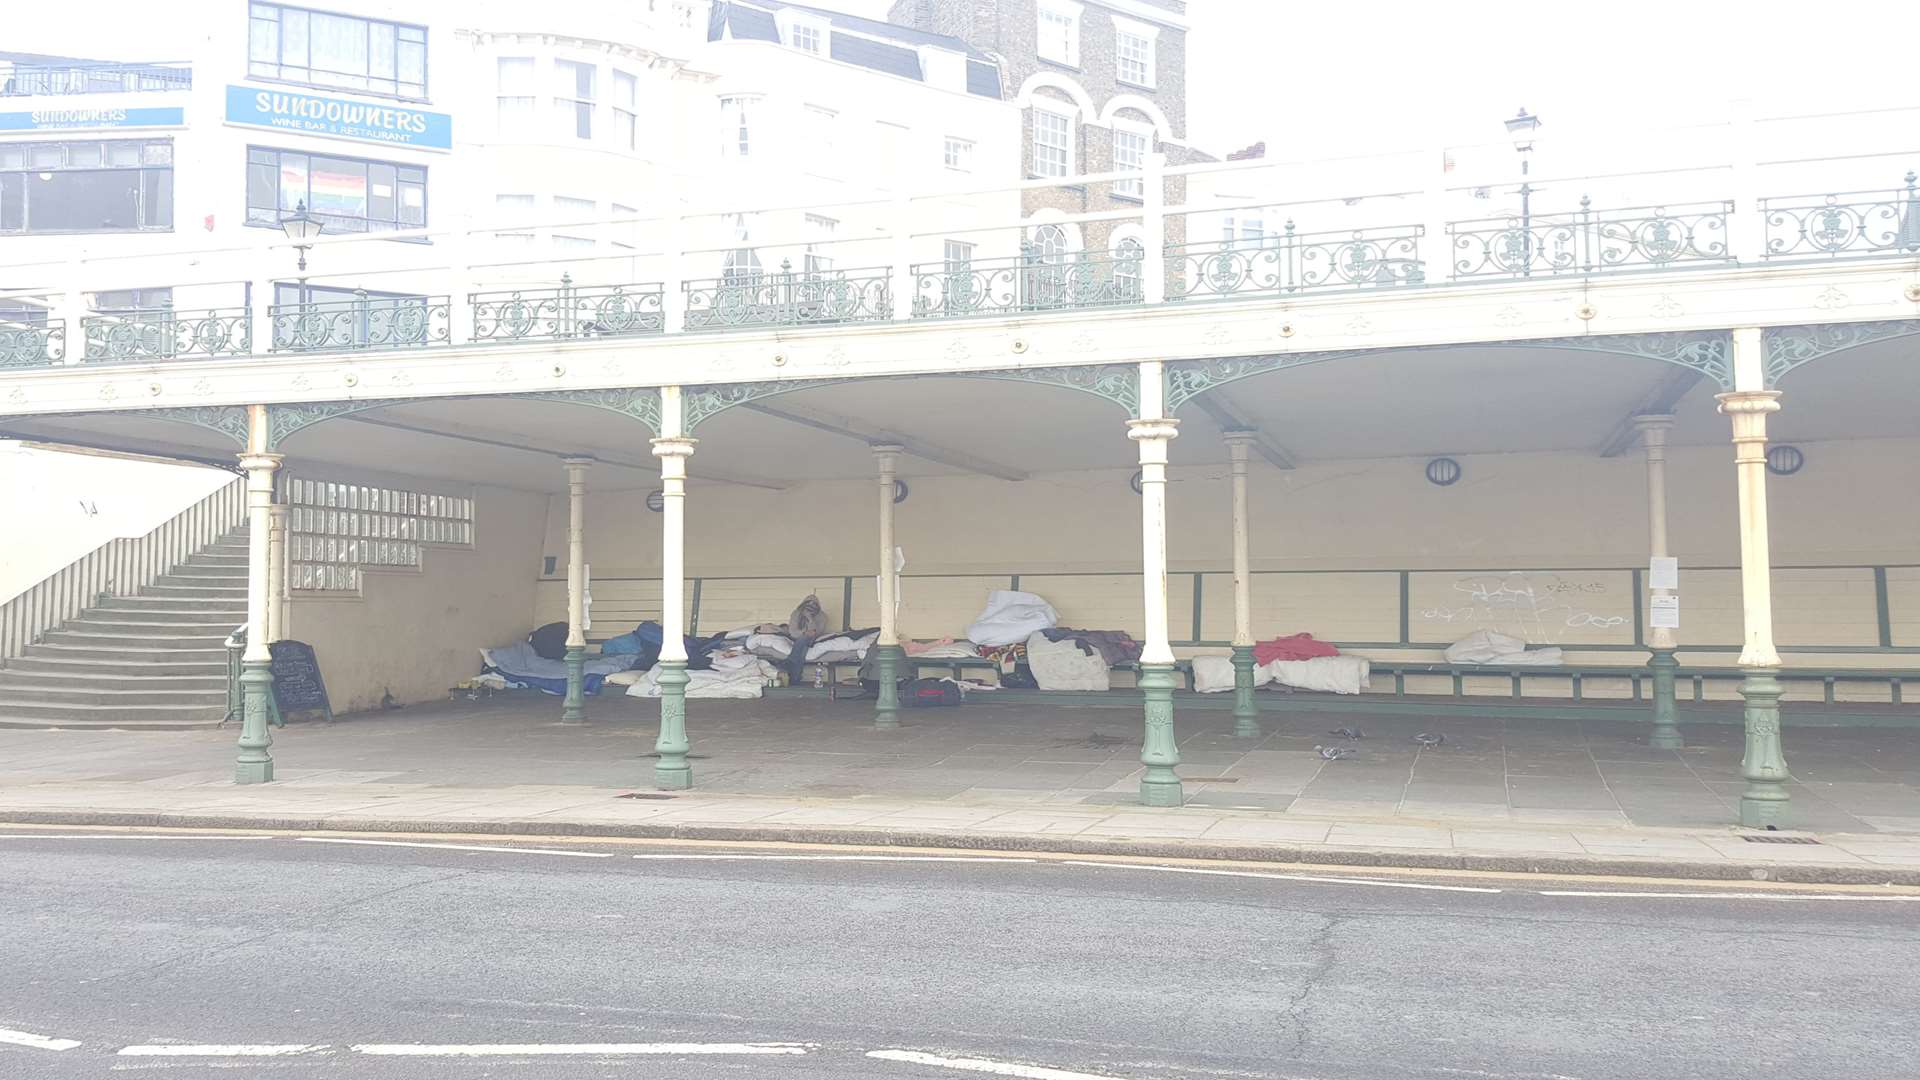 The shelter, which has now been boarded up, is opposite Margate Main Sands